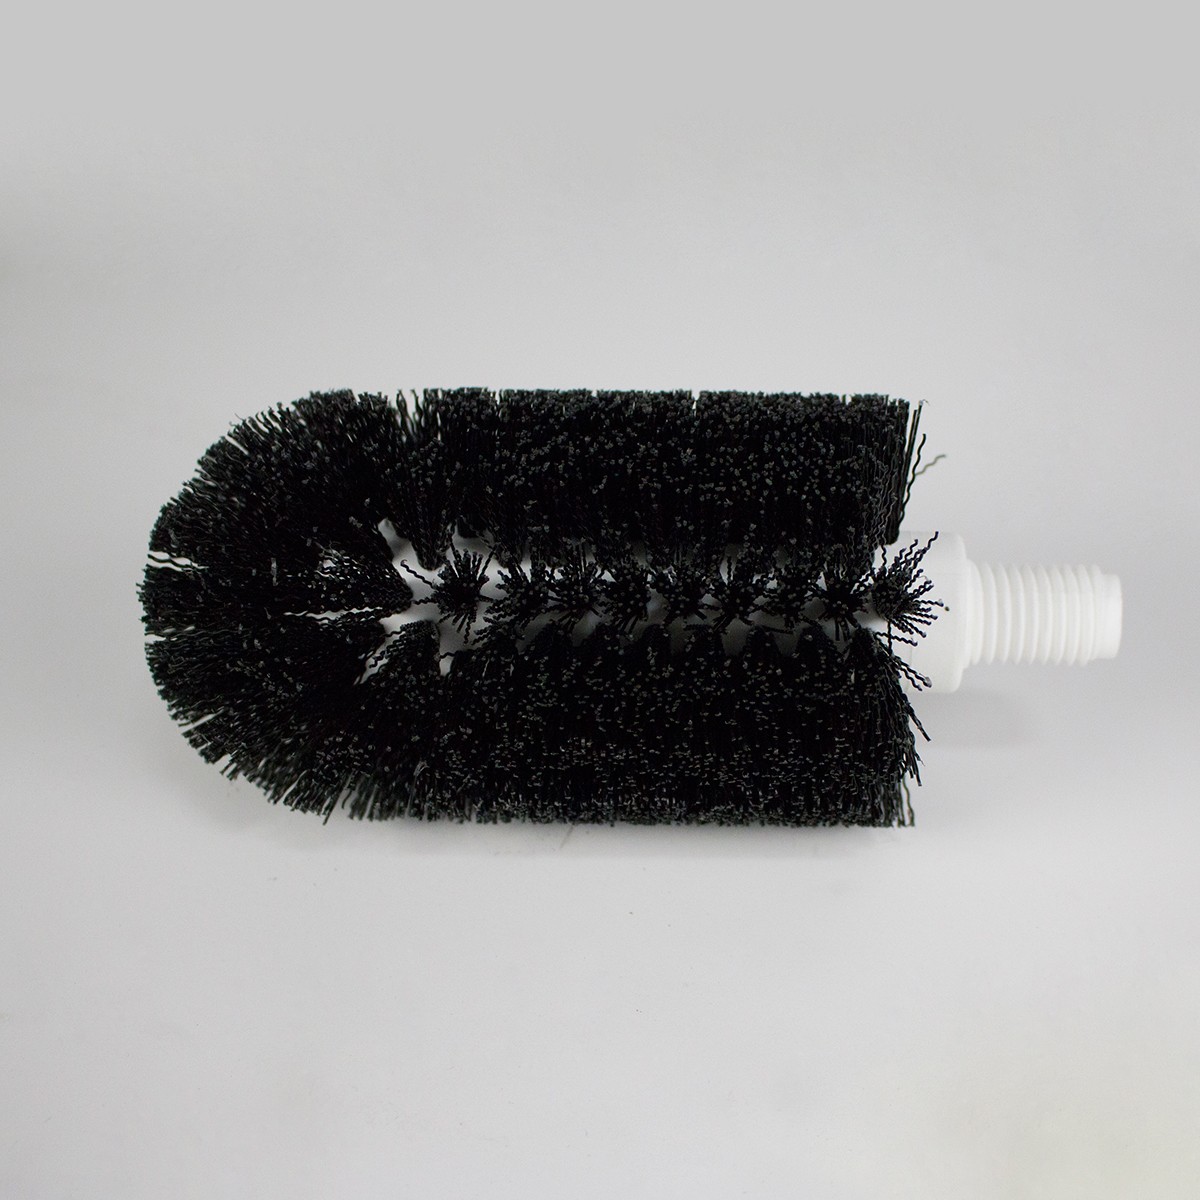 Commercial Drain Brush to clean facility floor drains and unclog blocked  drains - Drain-Net